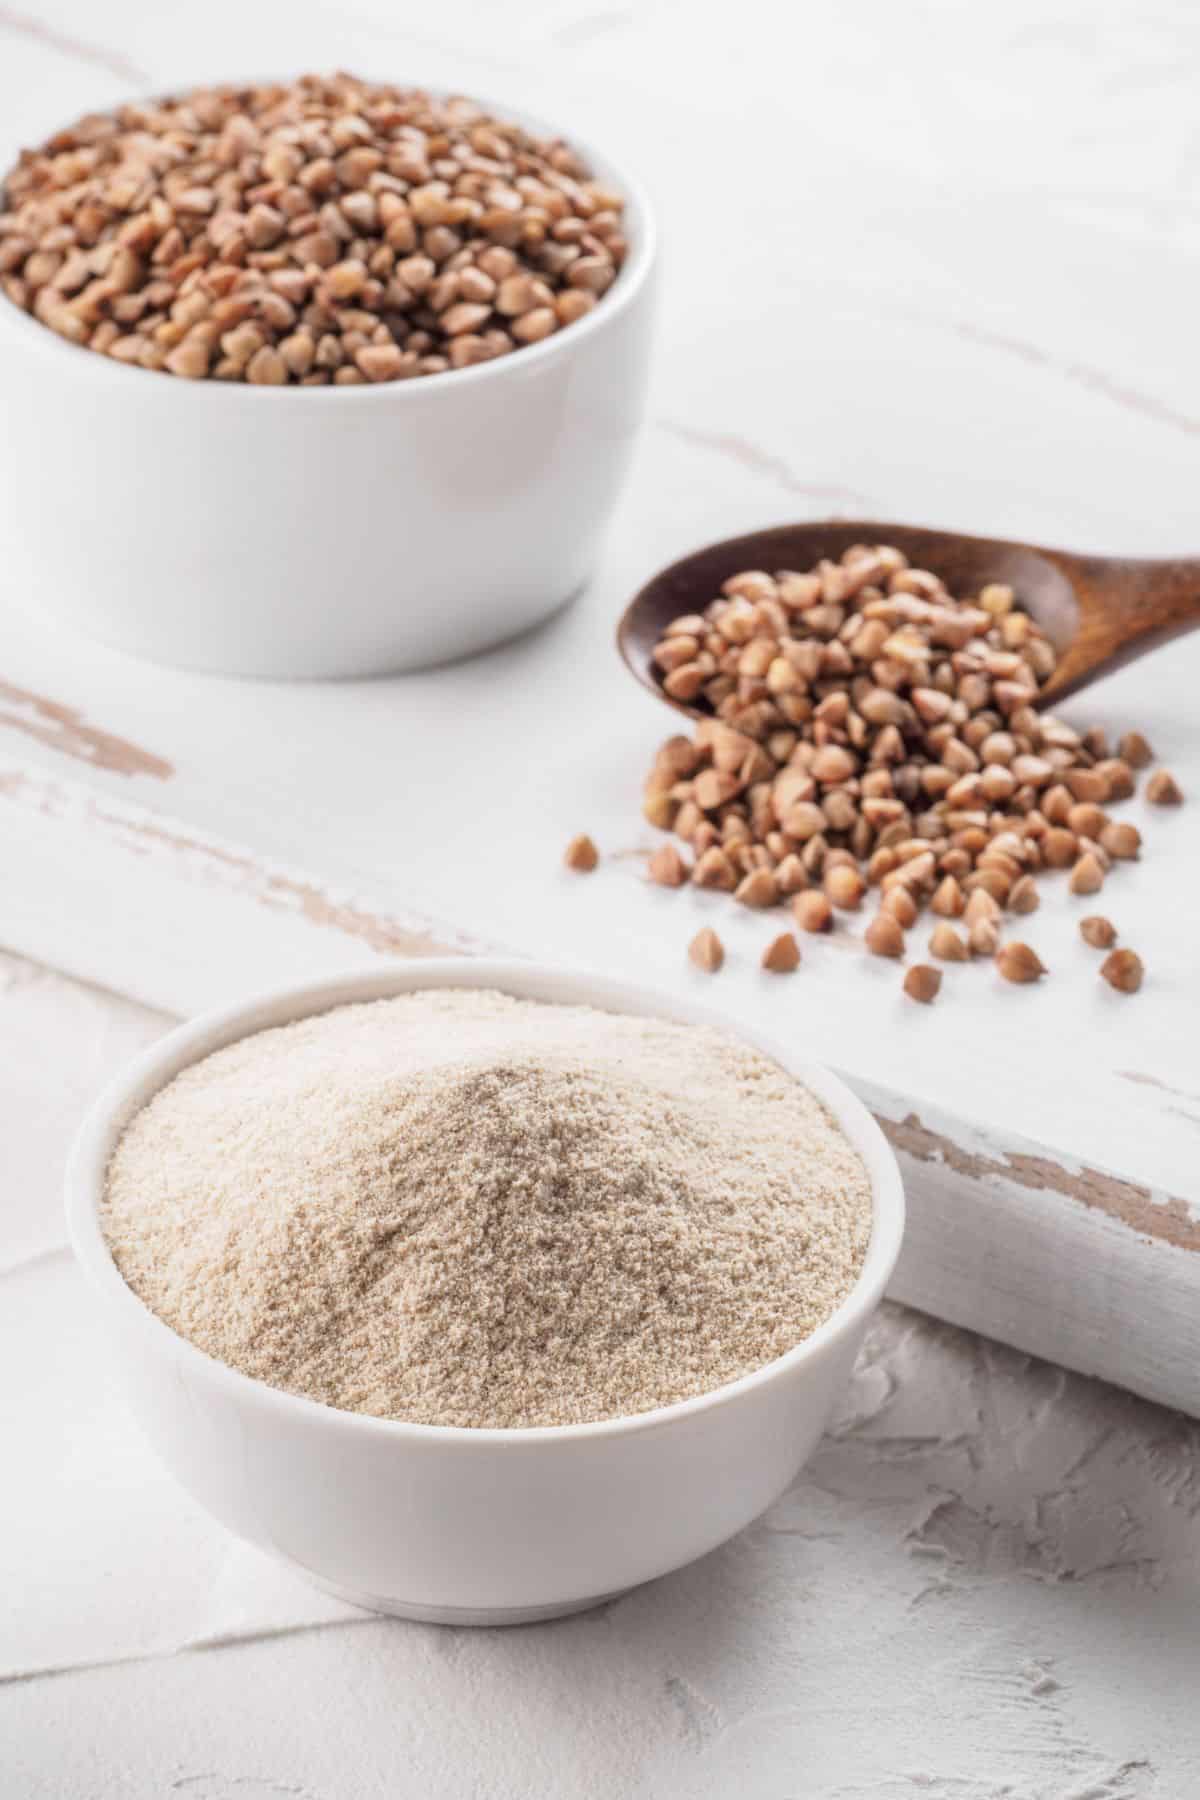 Bowls of buckwheat flour and whole buckwheat grains on white surface.